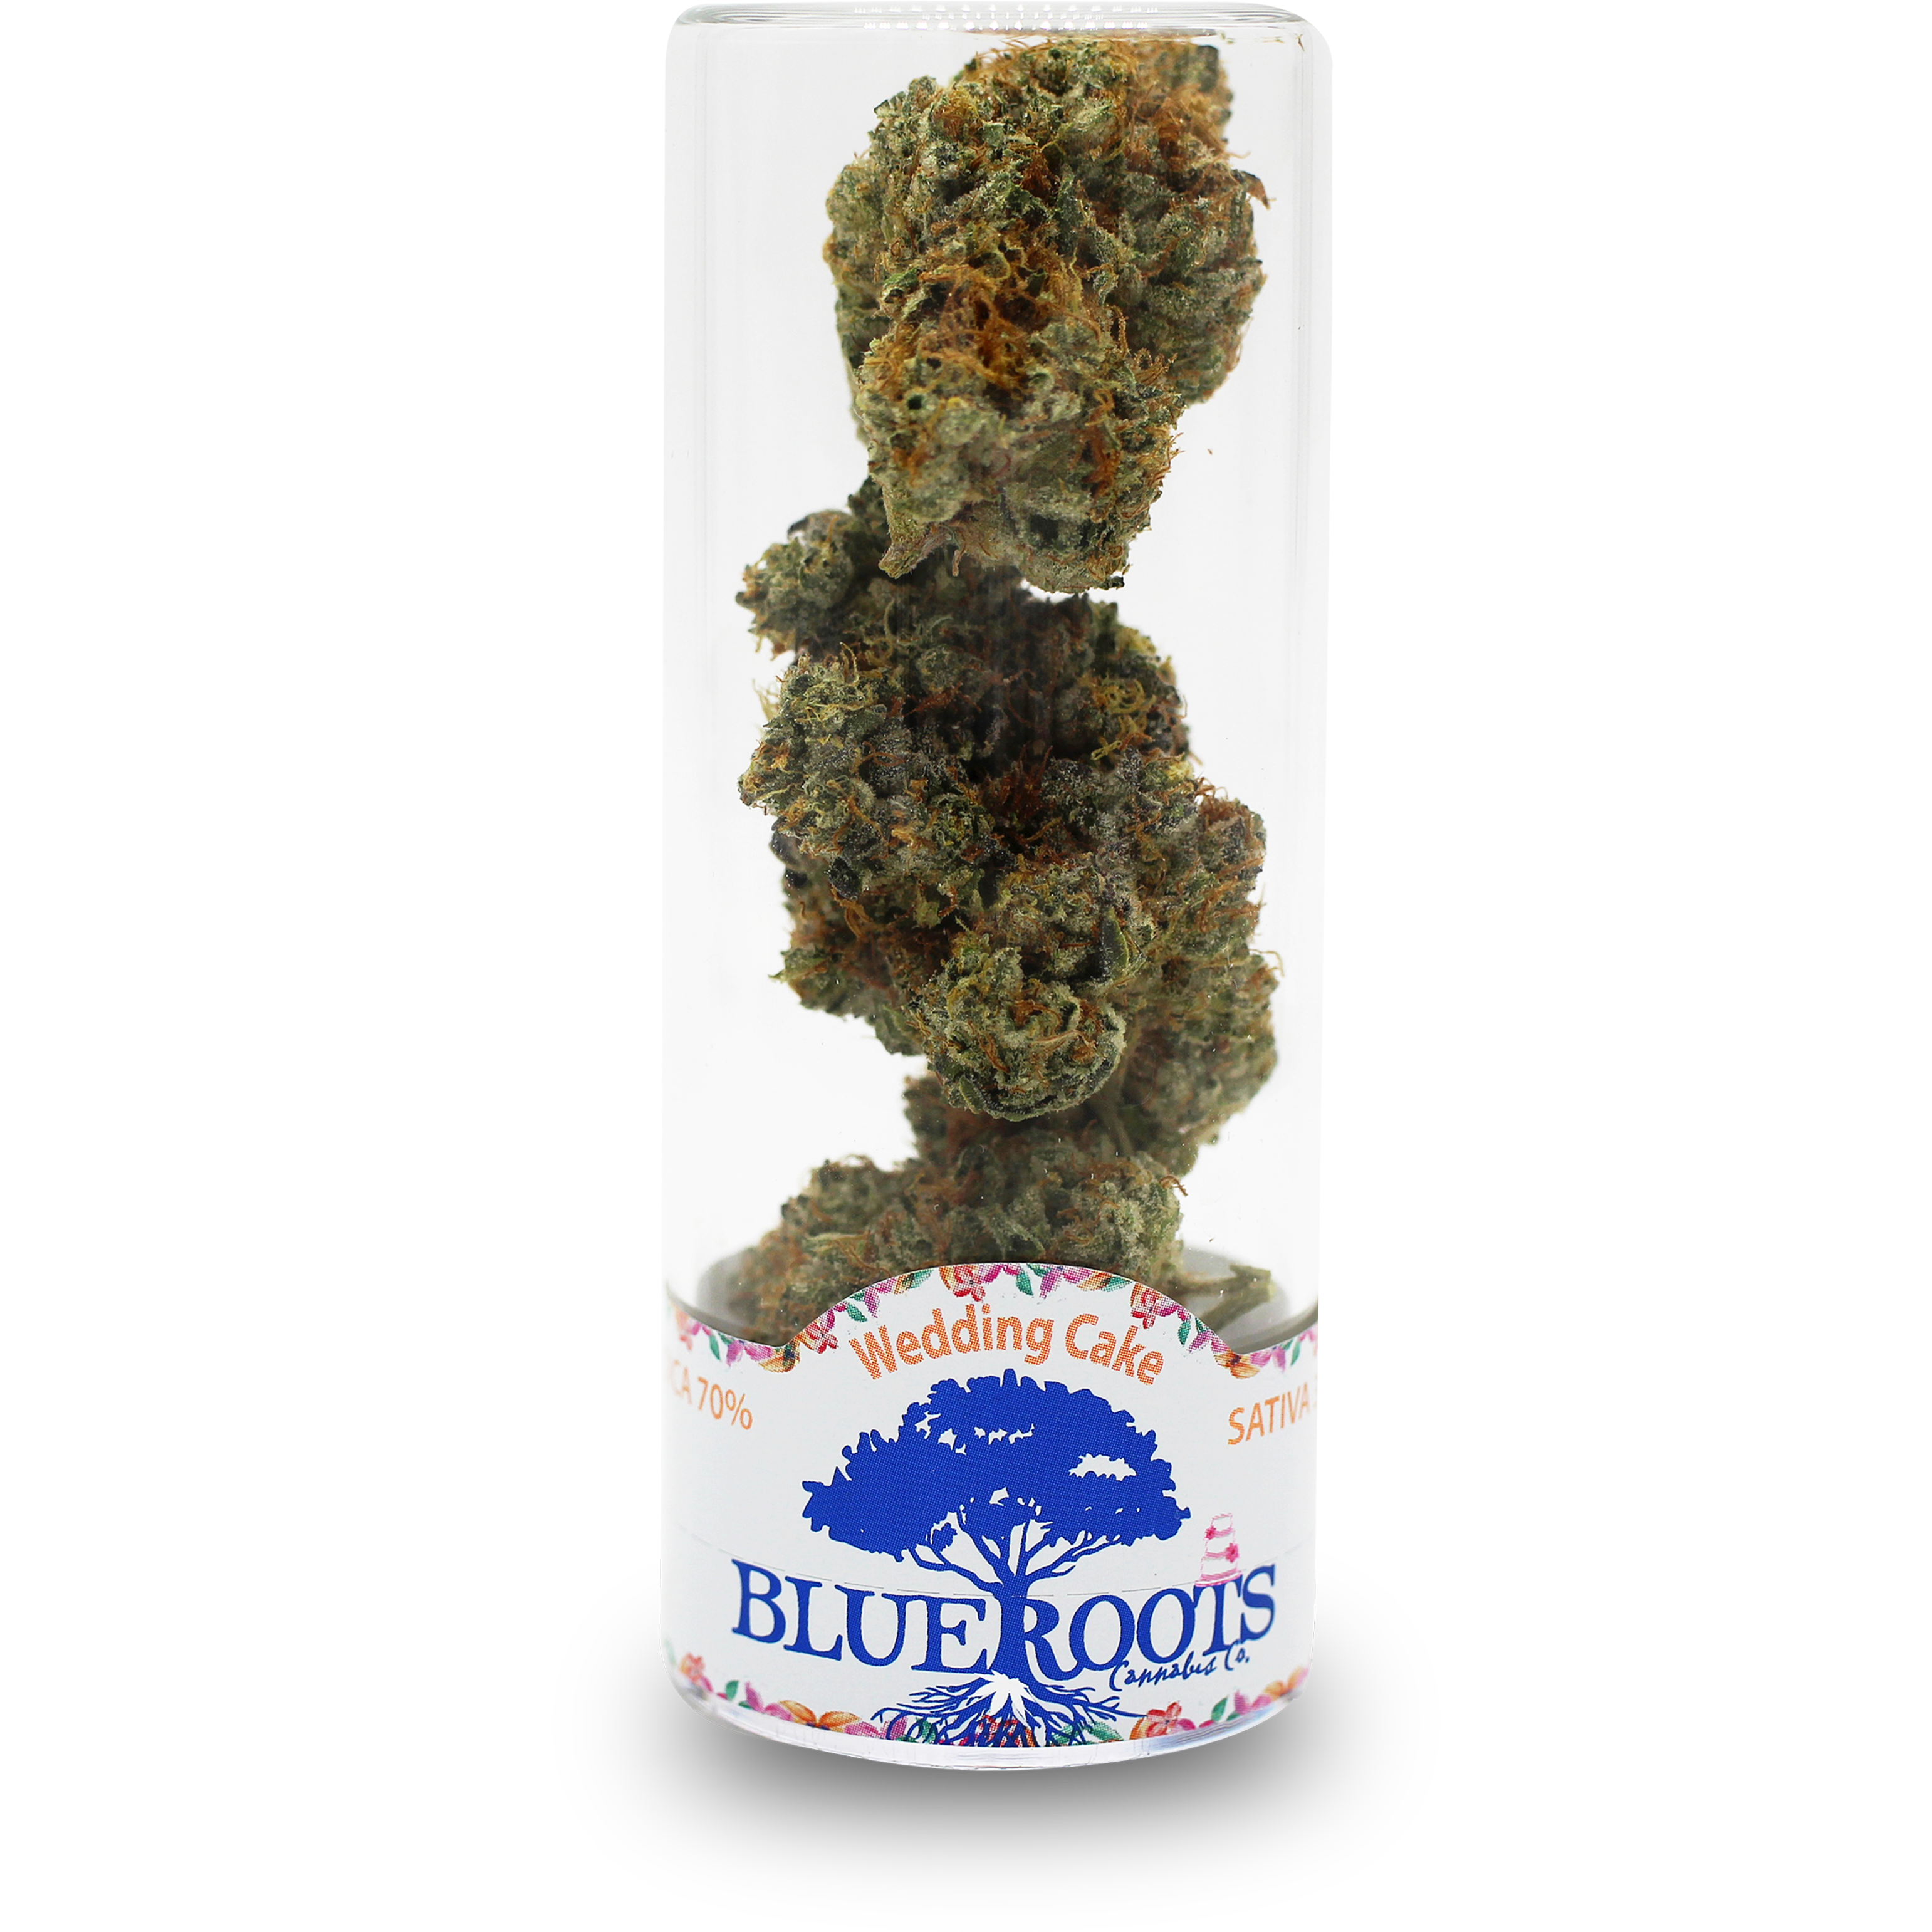 Blue Roots Cannabis Co.: Wedding Cake